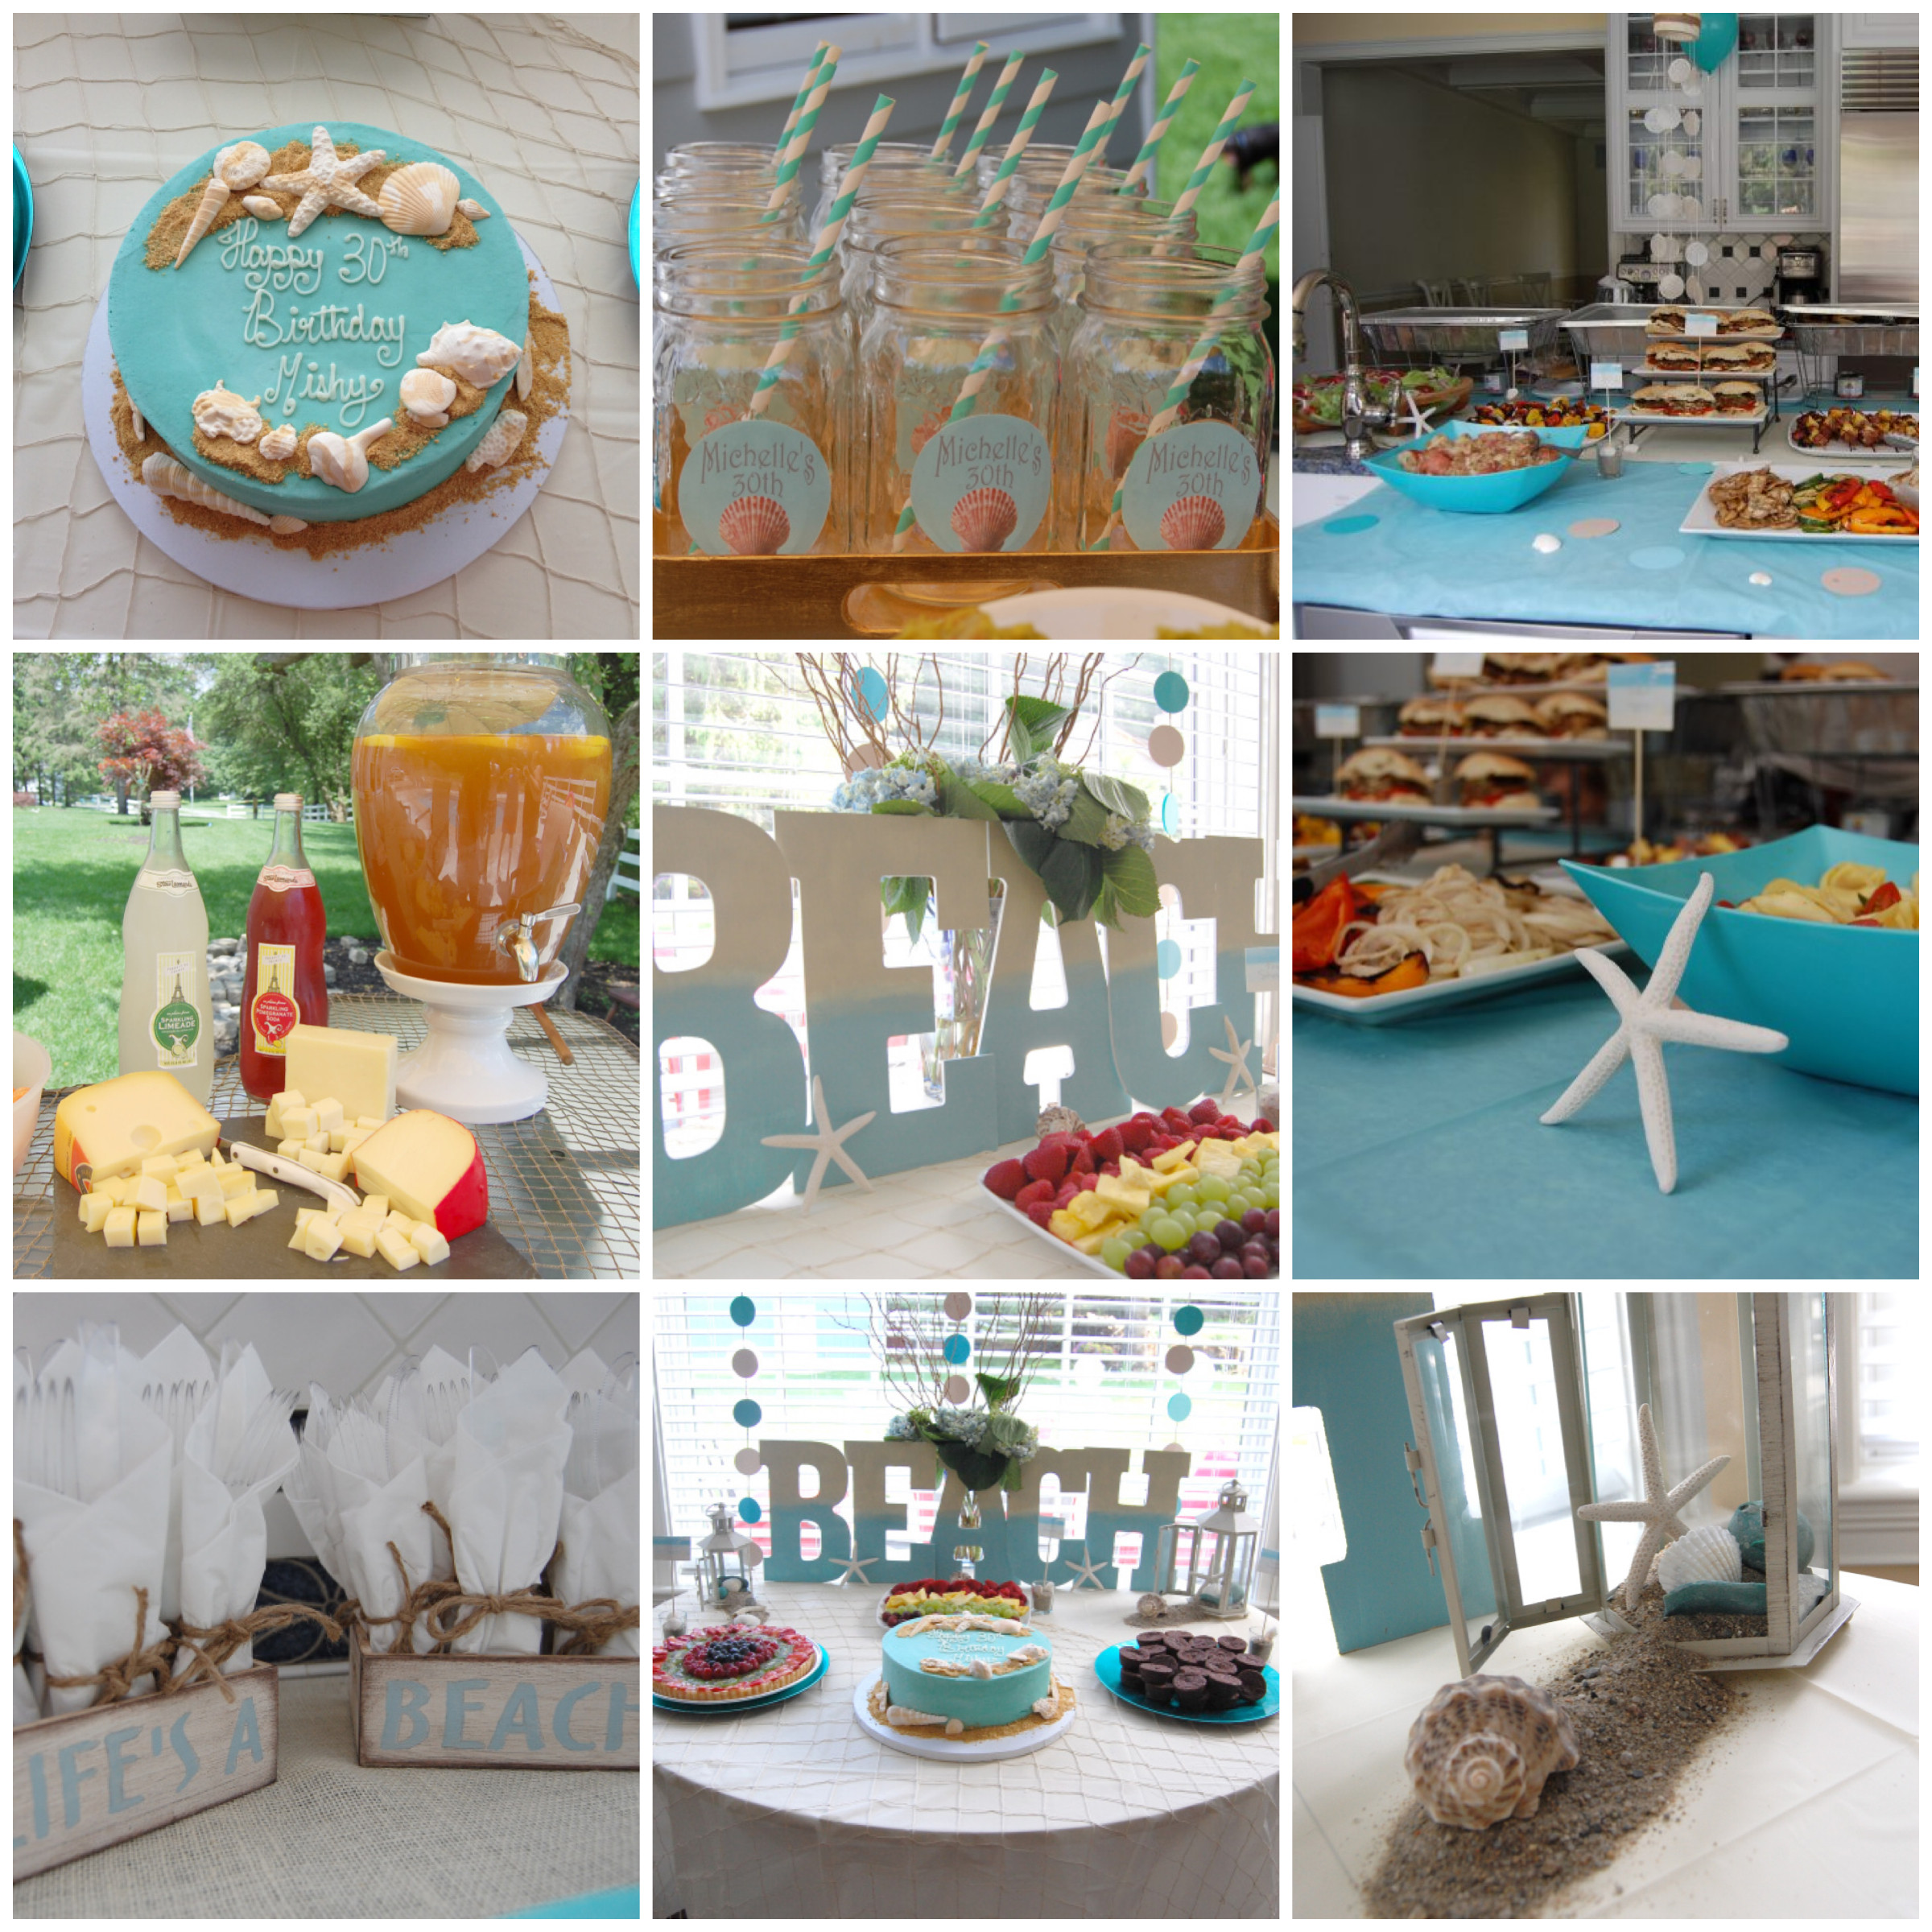 Beach Themed Retirement Party Ideas
 PARTY PLANNING